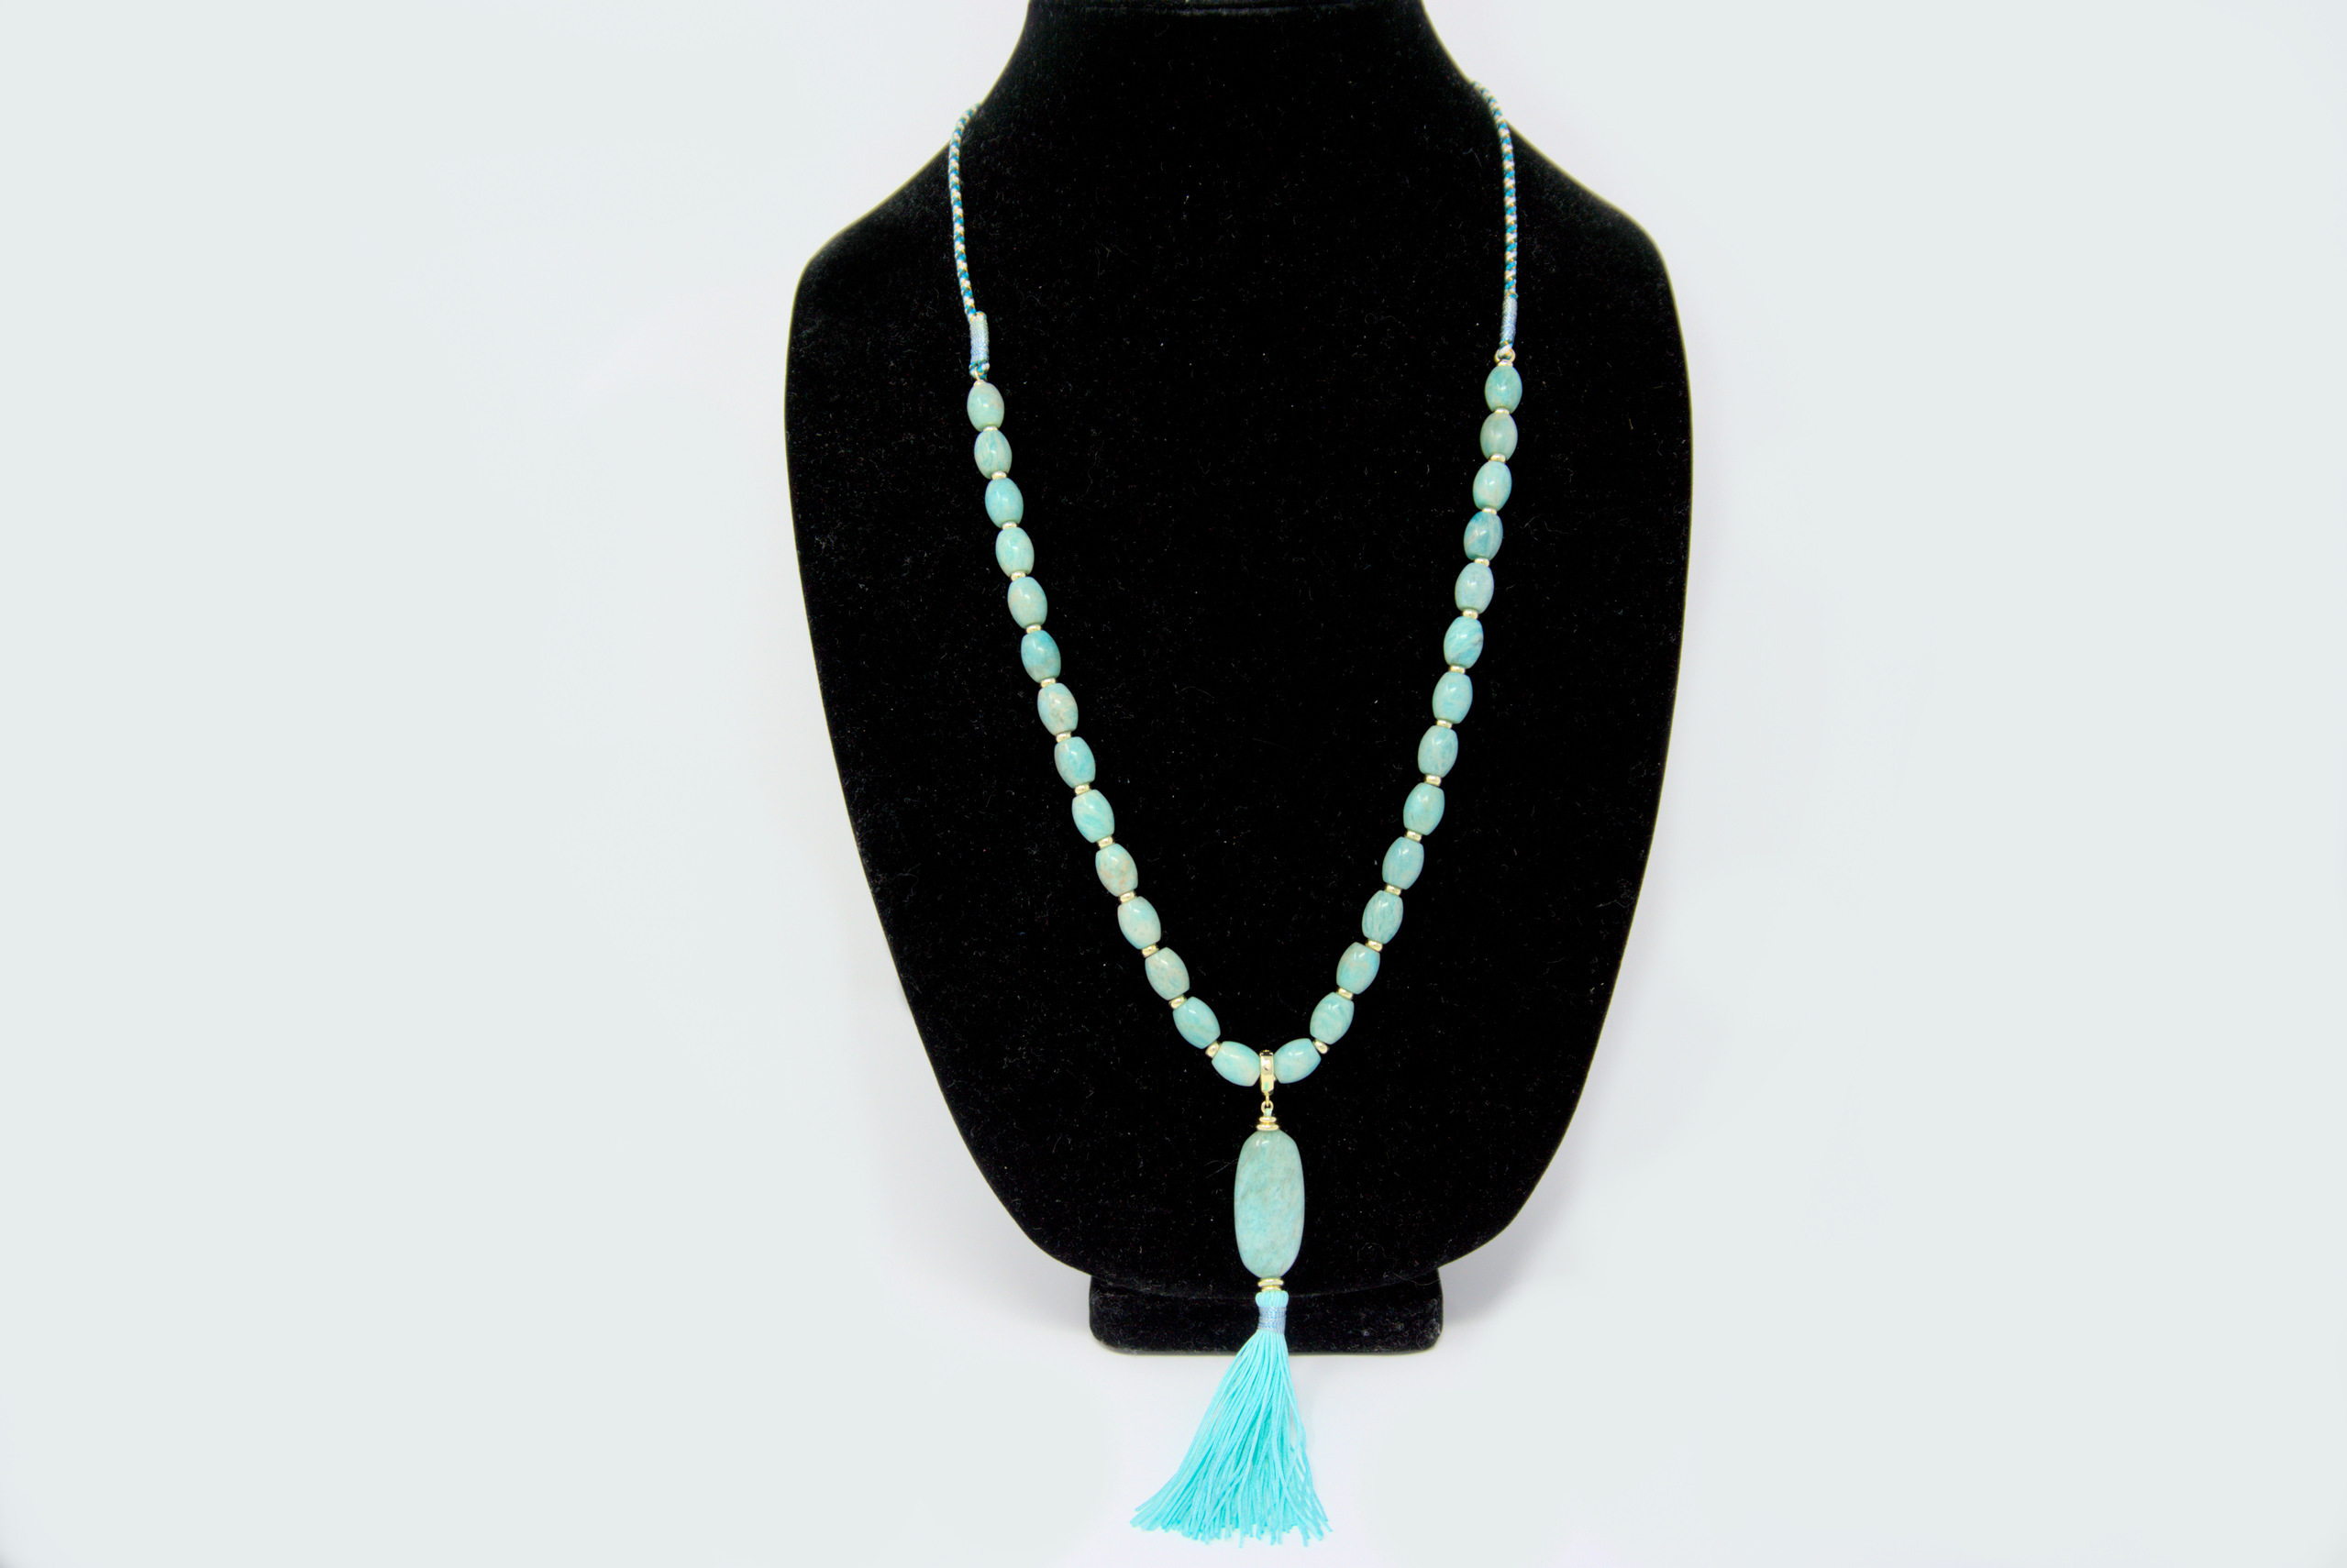 Charm & Lovely Quality Fashion Accessories, Affordable Prices introduces Kendra Scott 14k Gold-Plated Gemstone & Tassel Beaded Cord 28 Long Pendant Necklace - Teal Mix